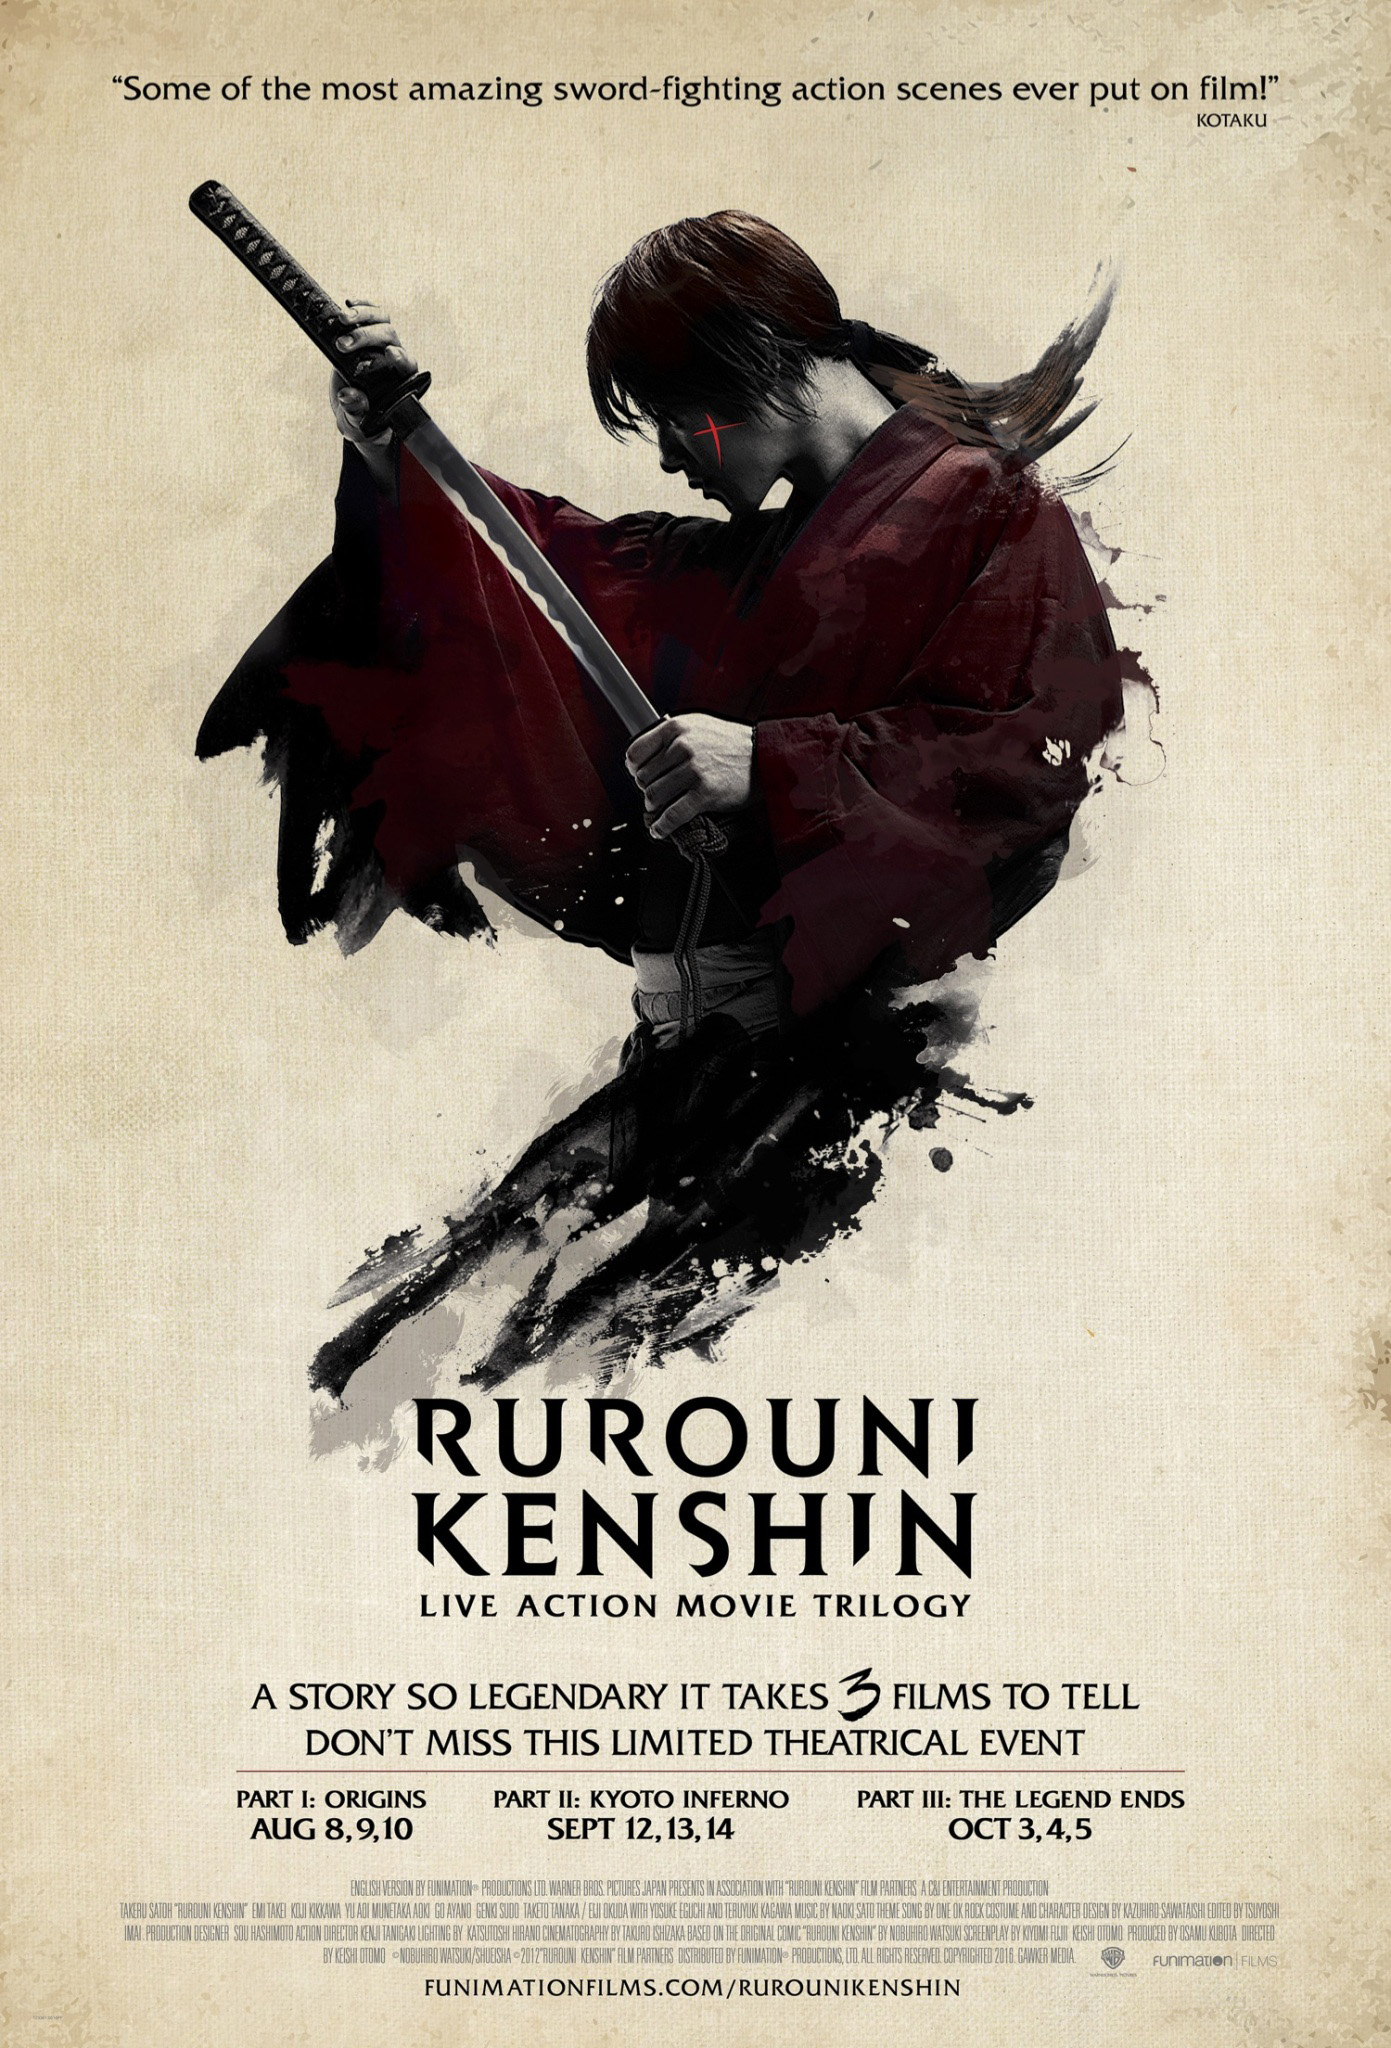 RUROUNI KENSHIN Parts 2 and 3 on Blu-ray and DVD from Funimation